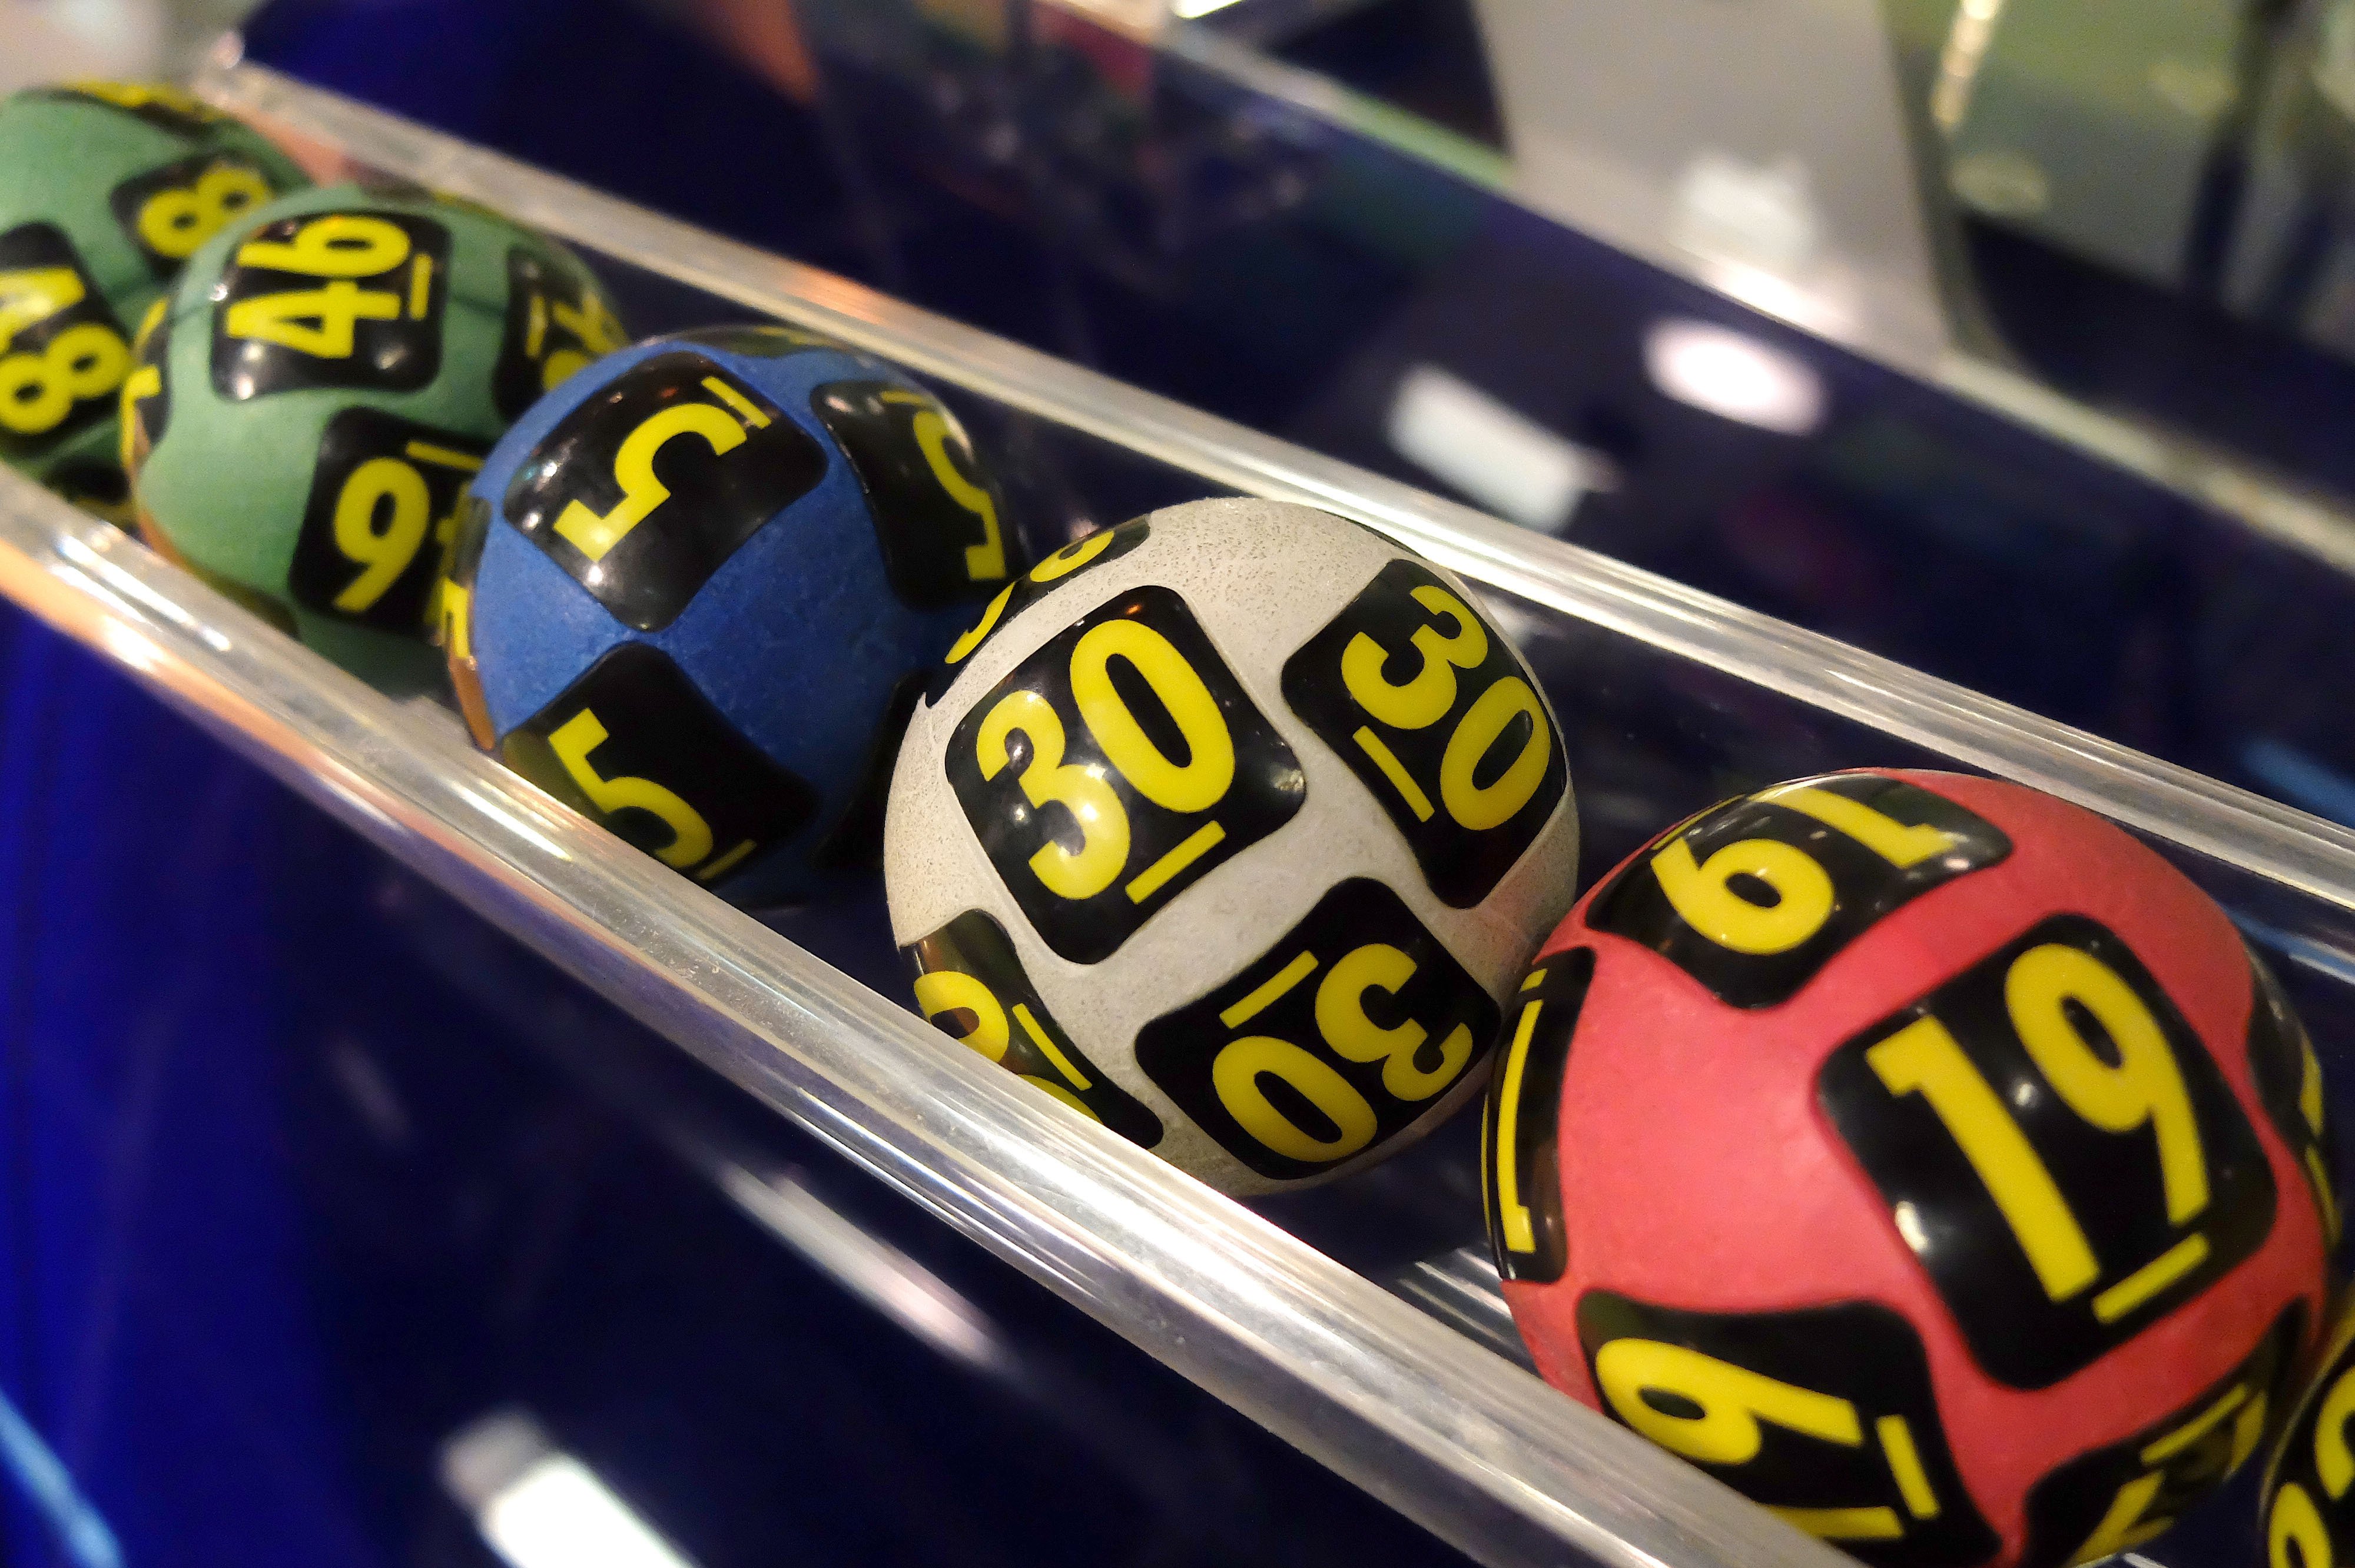 Lottery balls during the extraction of the winning numbers | Photo: Shutterstock